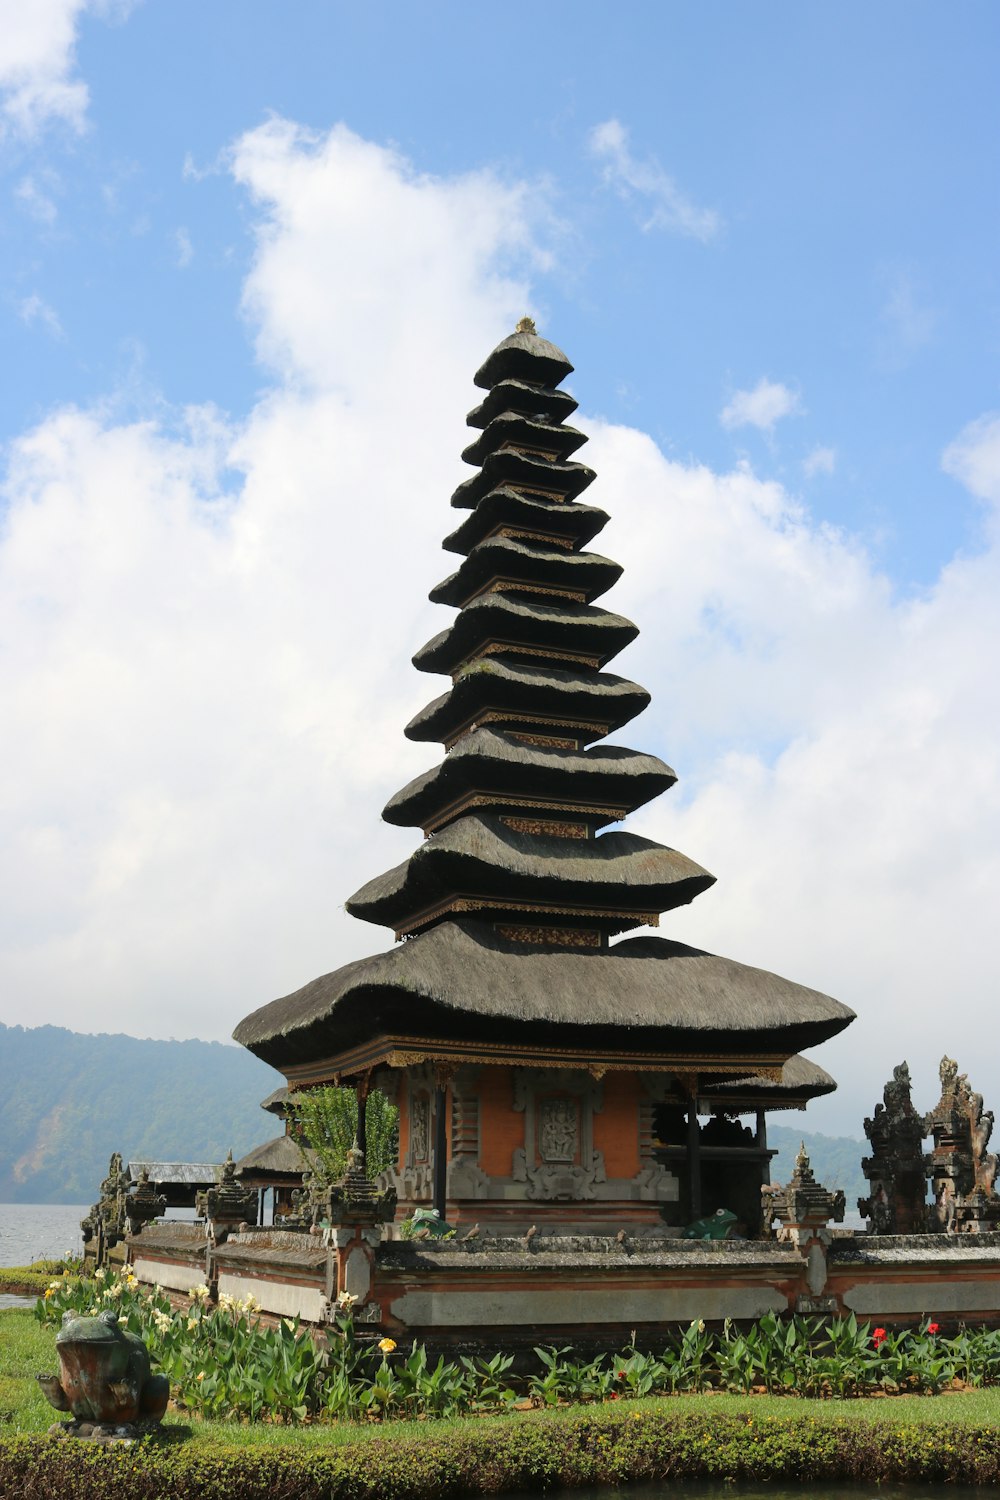 brown and black temple under white clouds and blue sky during daytime